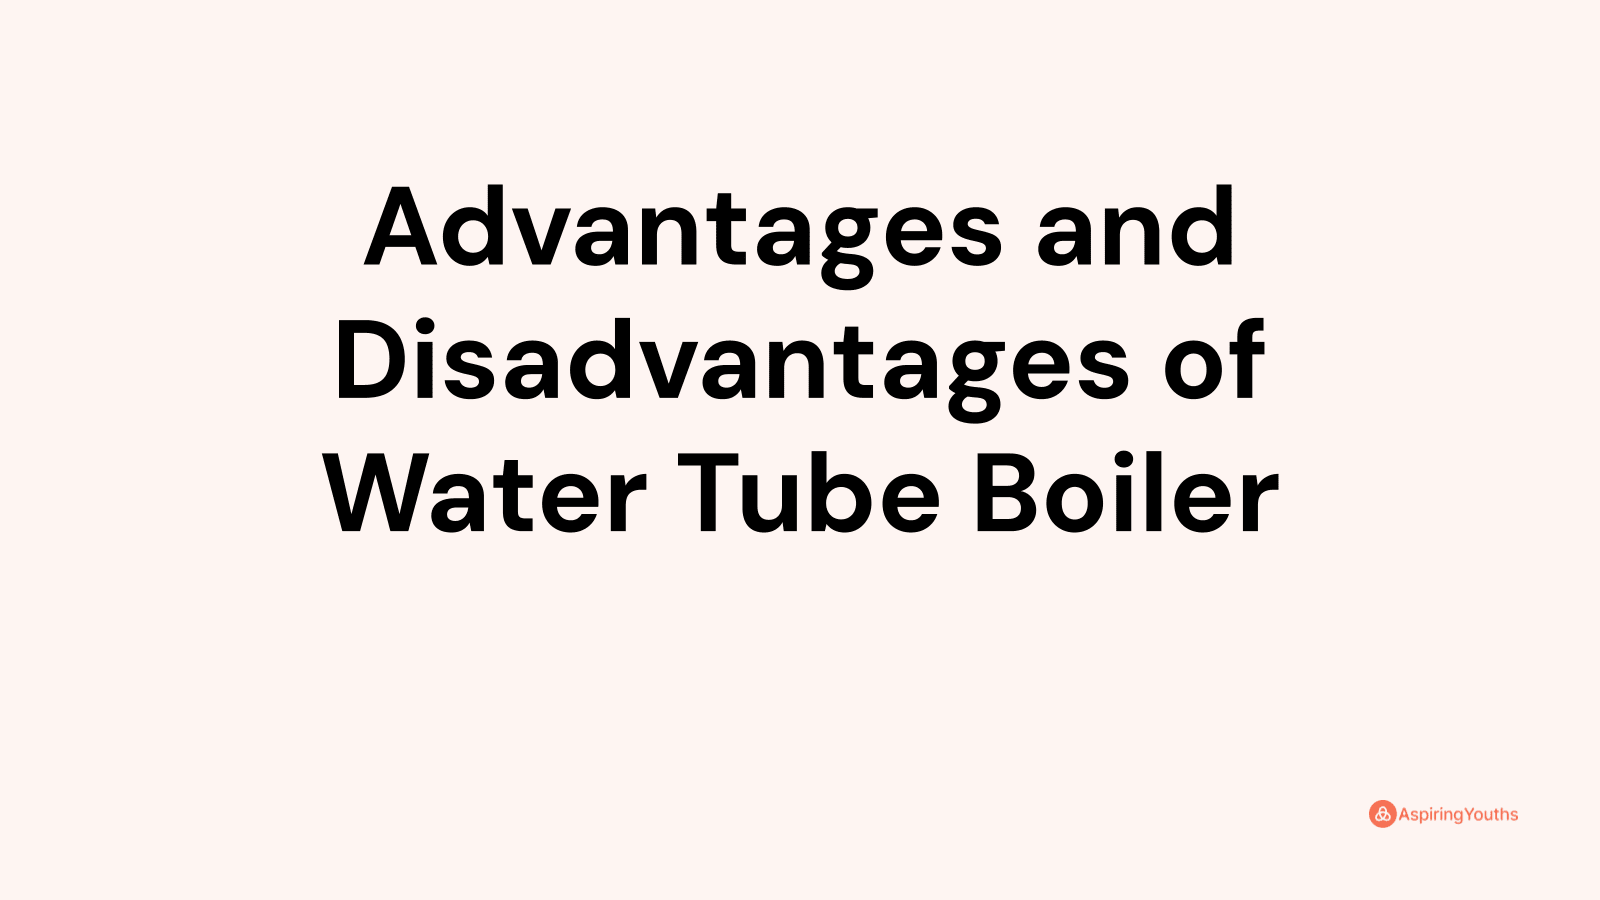 Advantages and disadvantages of Water Tube Boiler